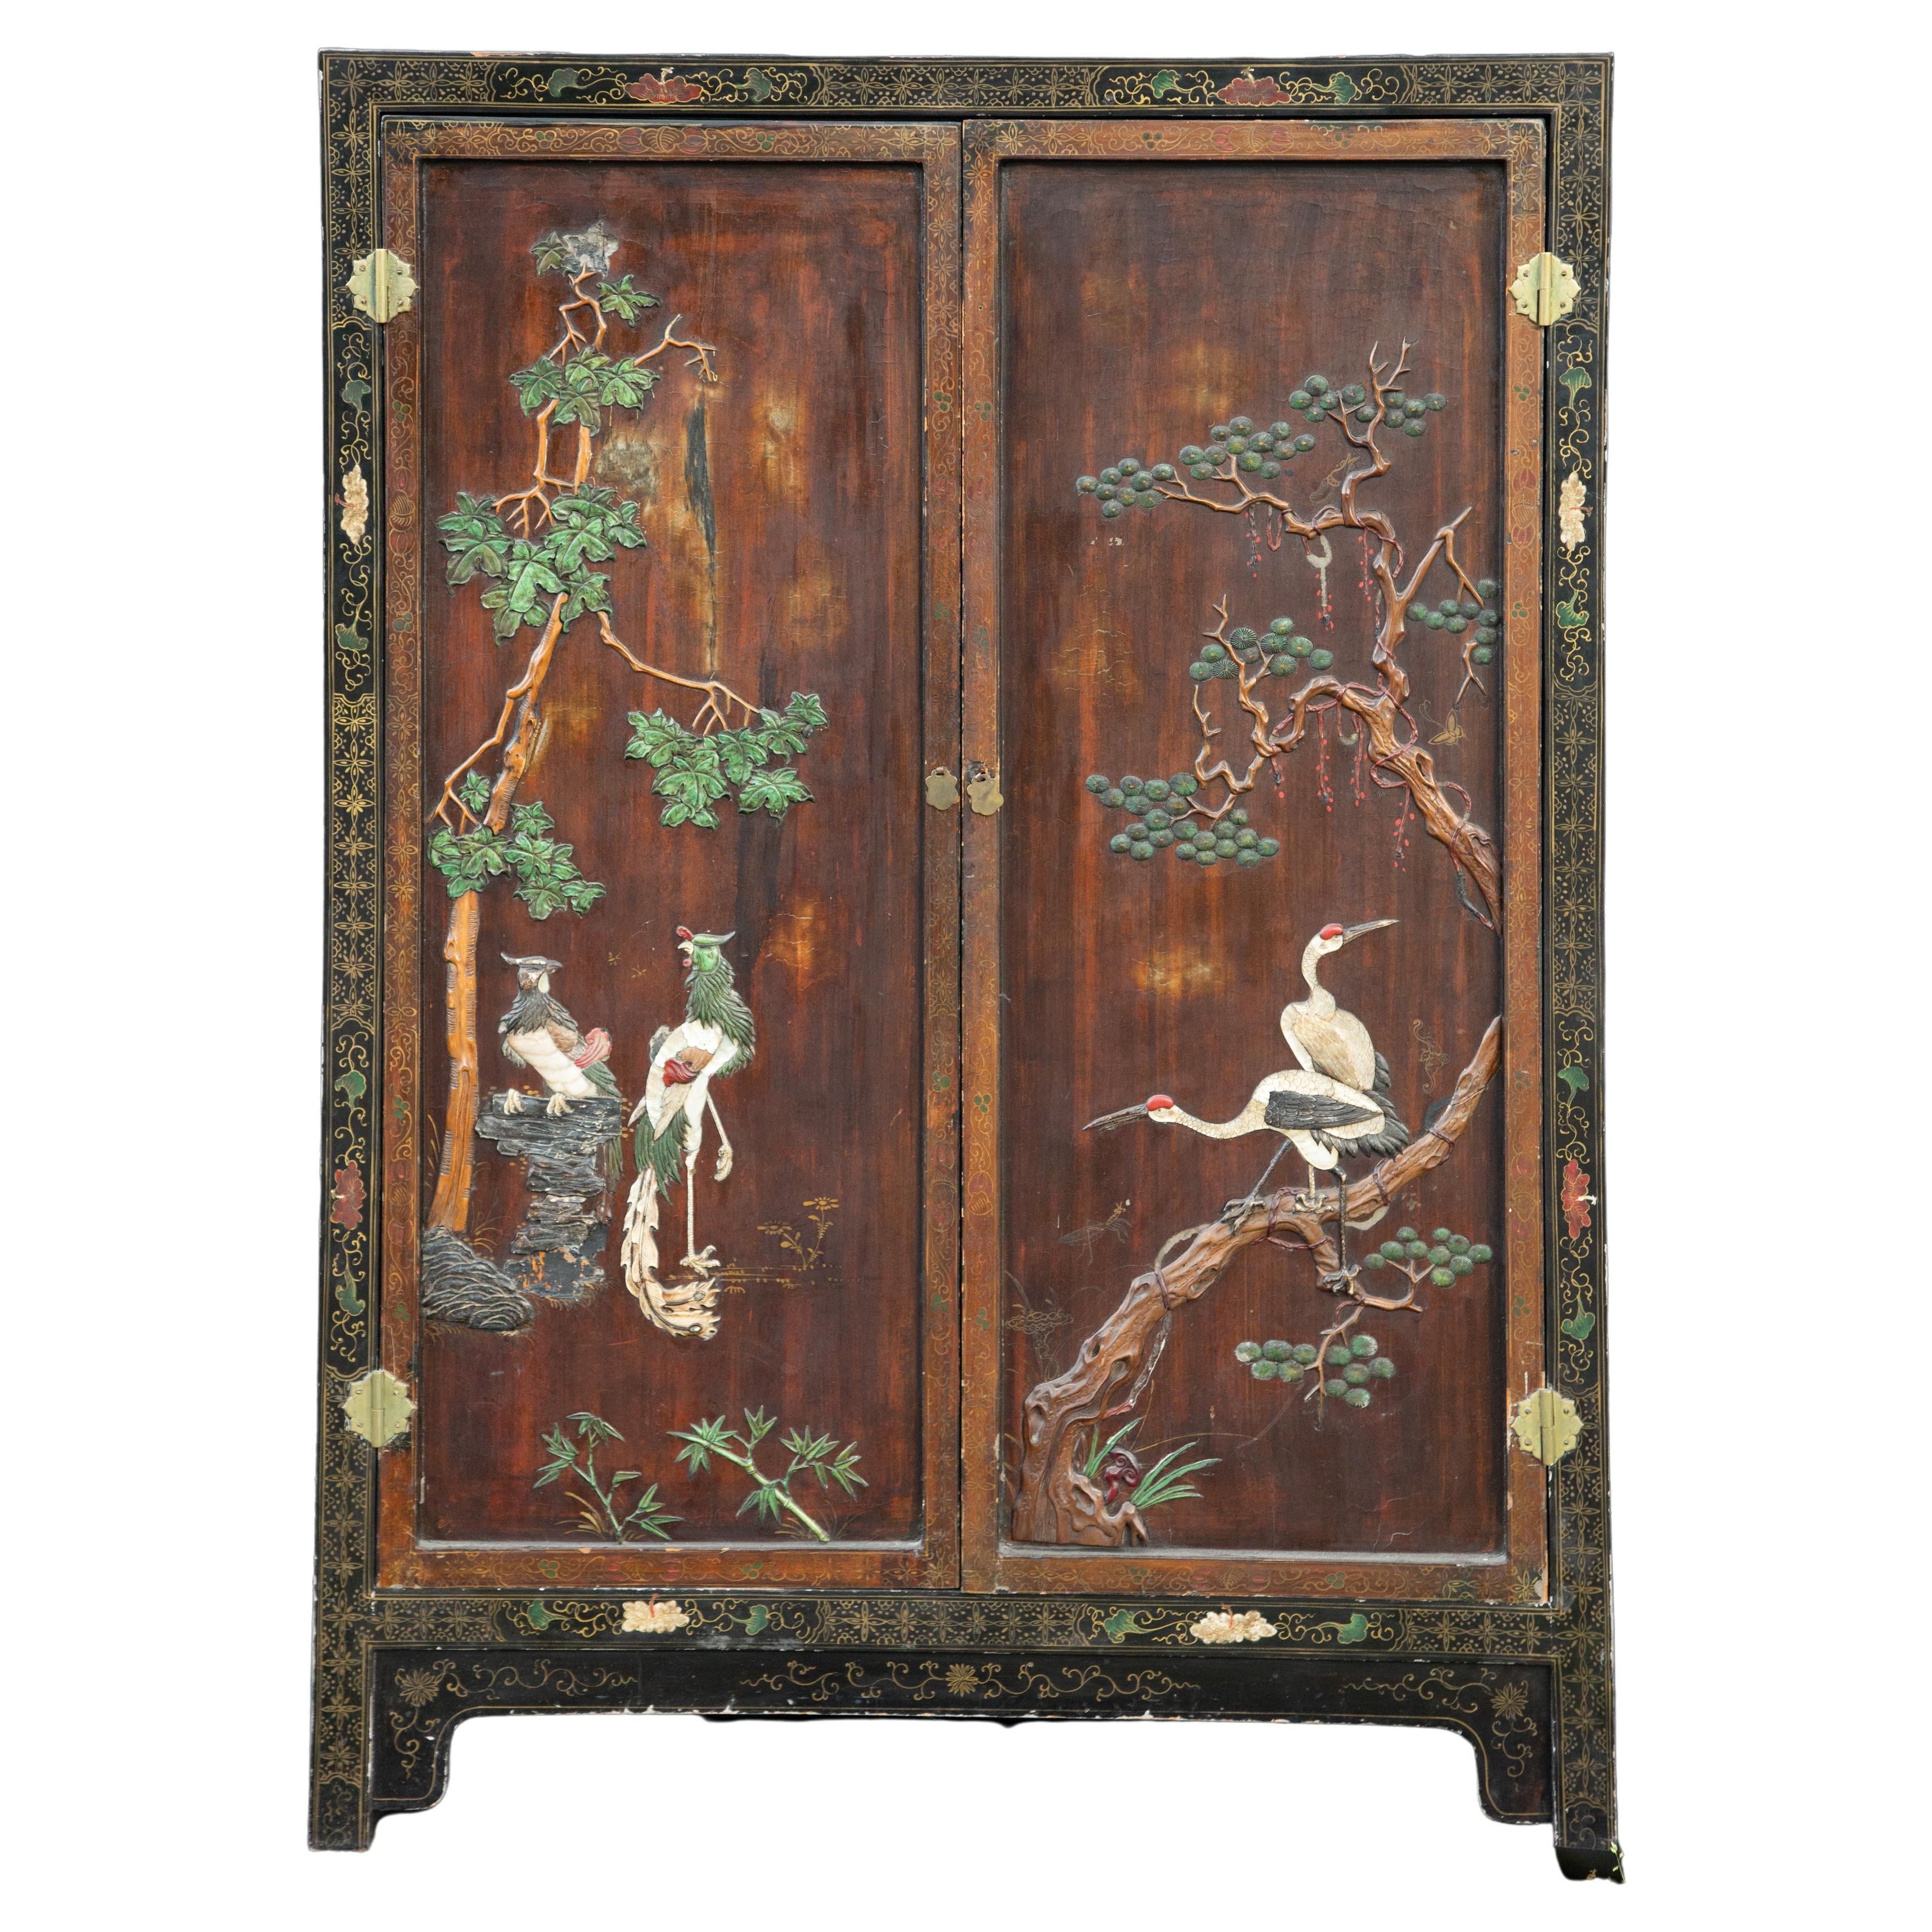 19th Century Chinese Armoire Decorated with High Relief Flora and Fauna 57.75"H